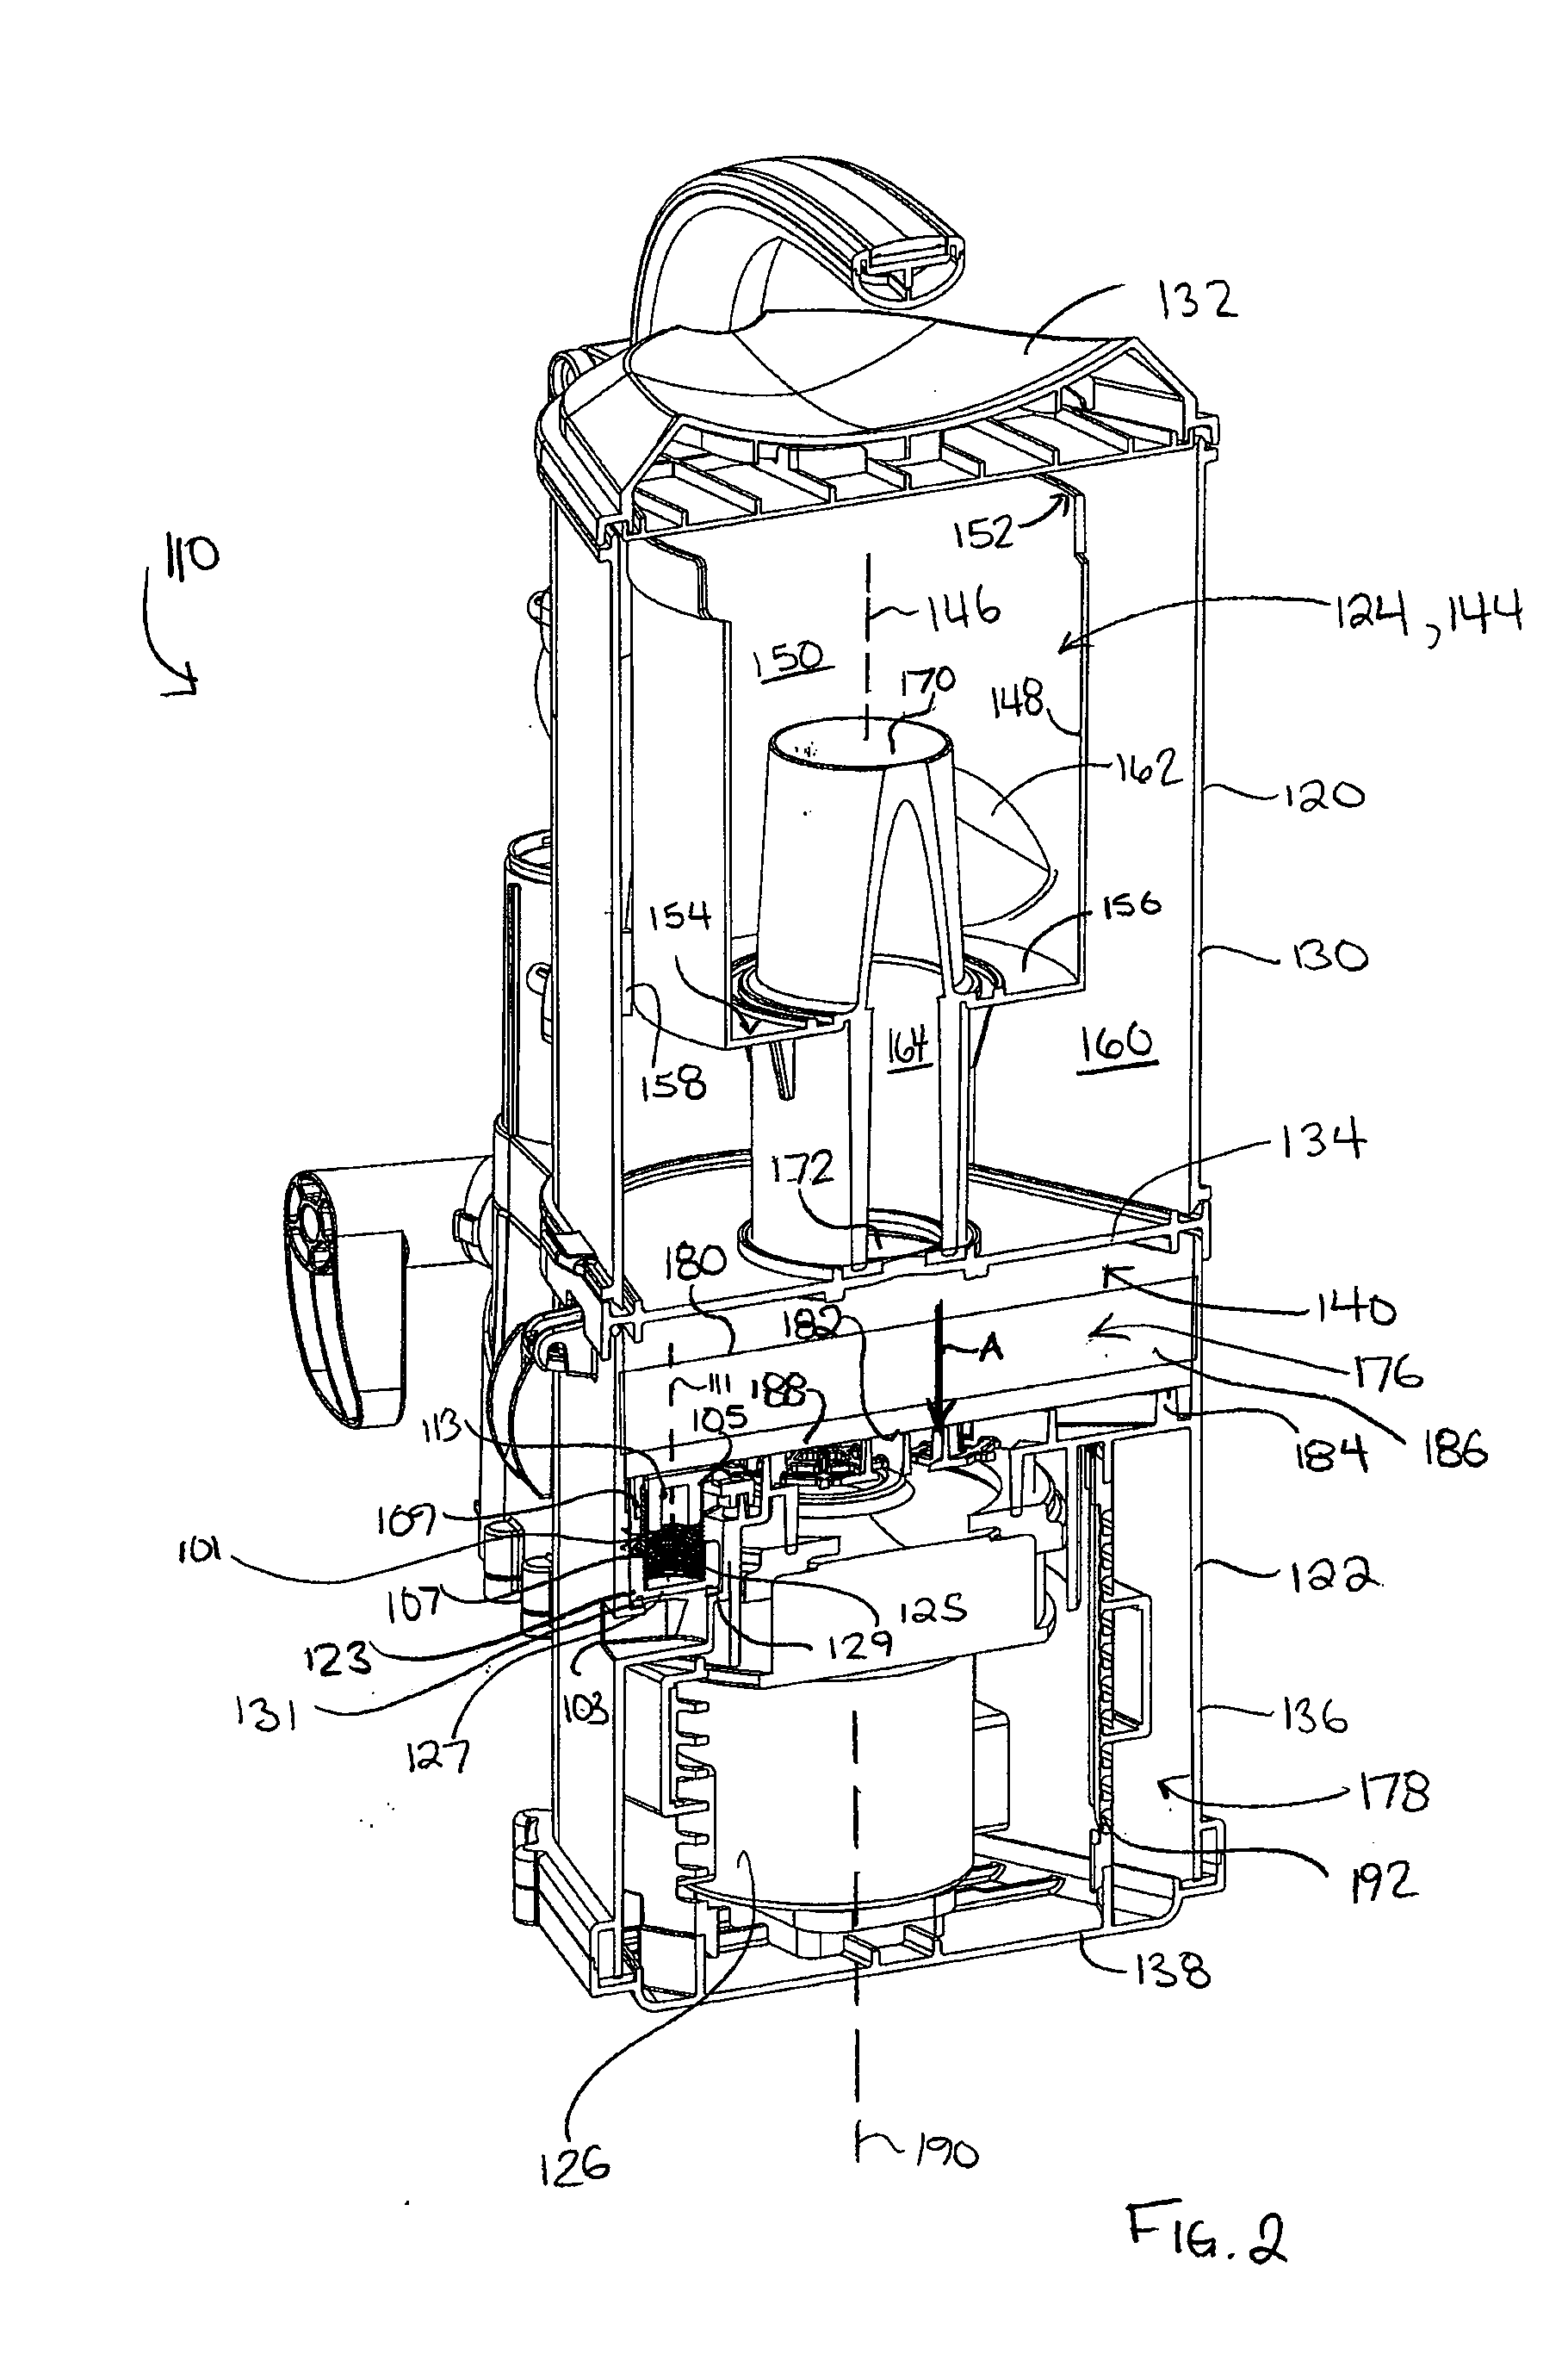 Surface cleaning apparatus with enhanced operability